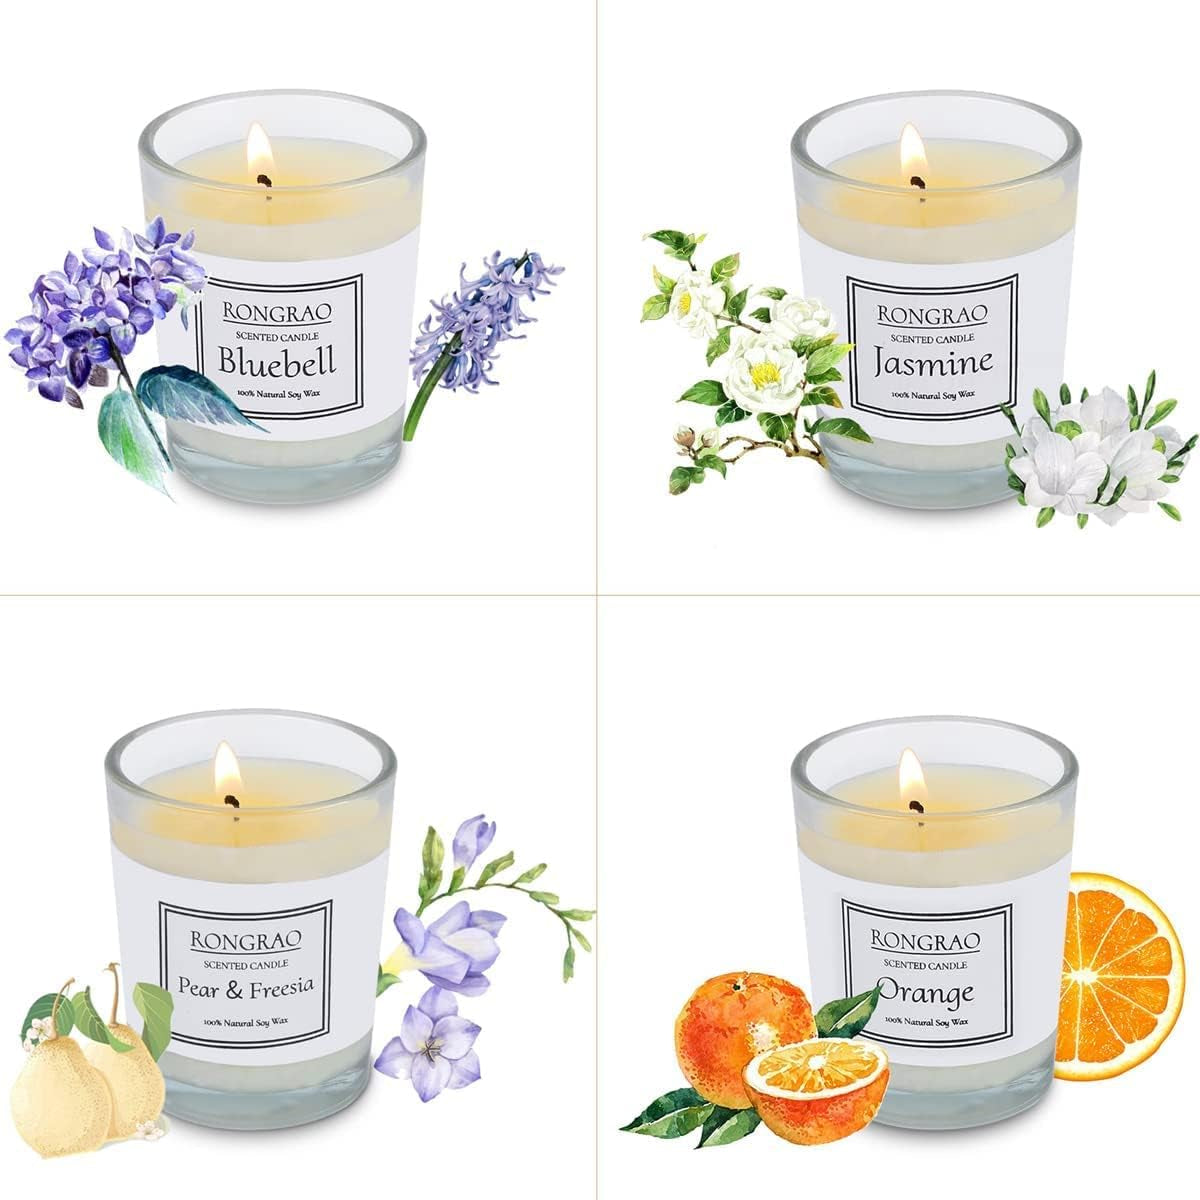 Scented Candles Gift Set, Soy Wax Candle of Jasmine, Pear & Freesia, Orange, Bluebell, Perfect for Women, Birthday, Bath Yoga, Weddings, Christmas, Mother’S Day, Valentine’S Day